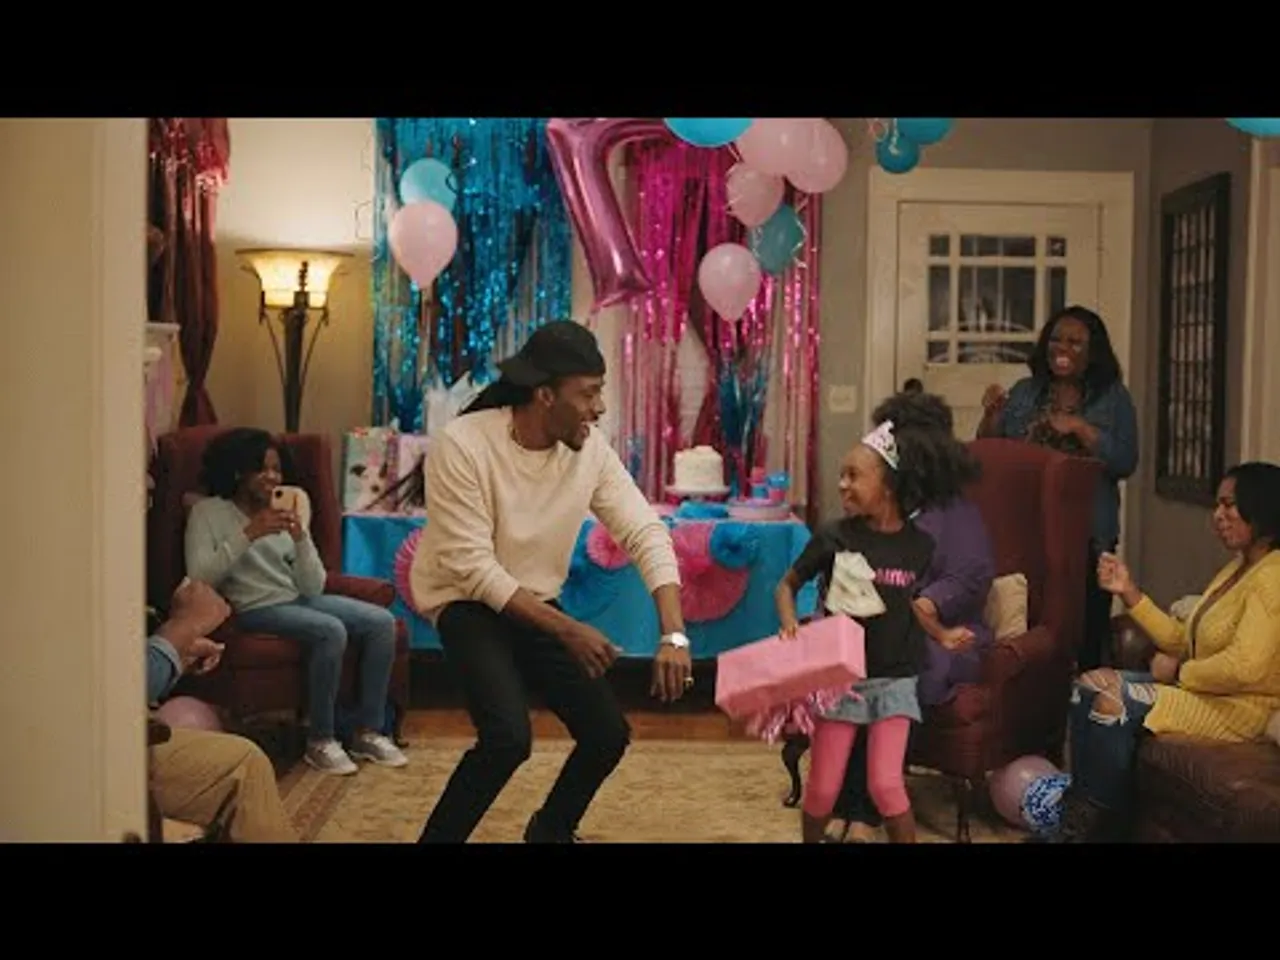 Global Samosa: P&G's 'Widen the screen' to confront stereotypes against black people